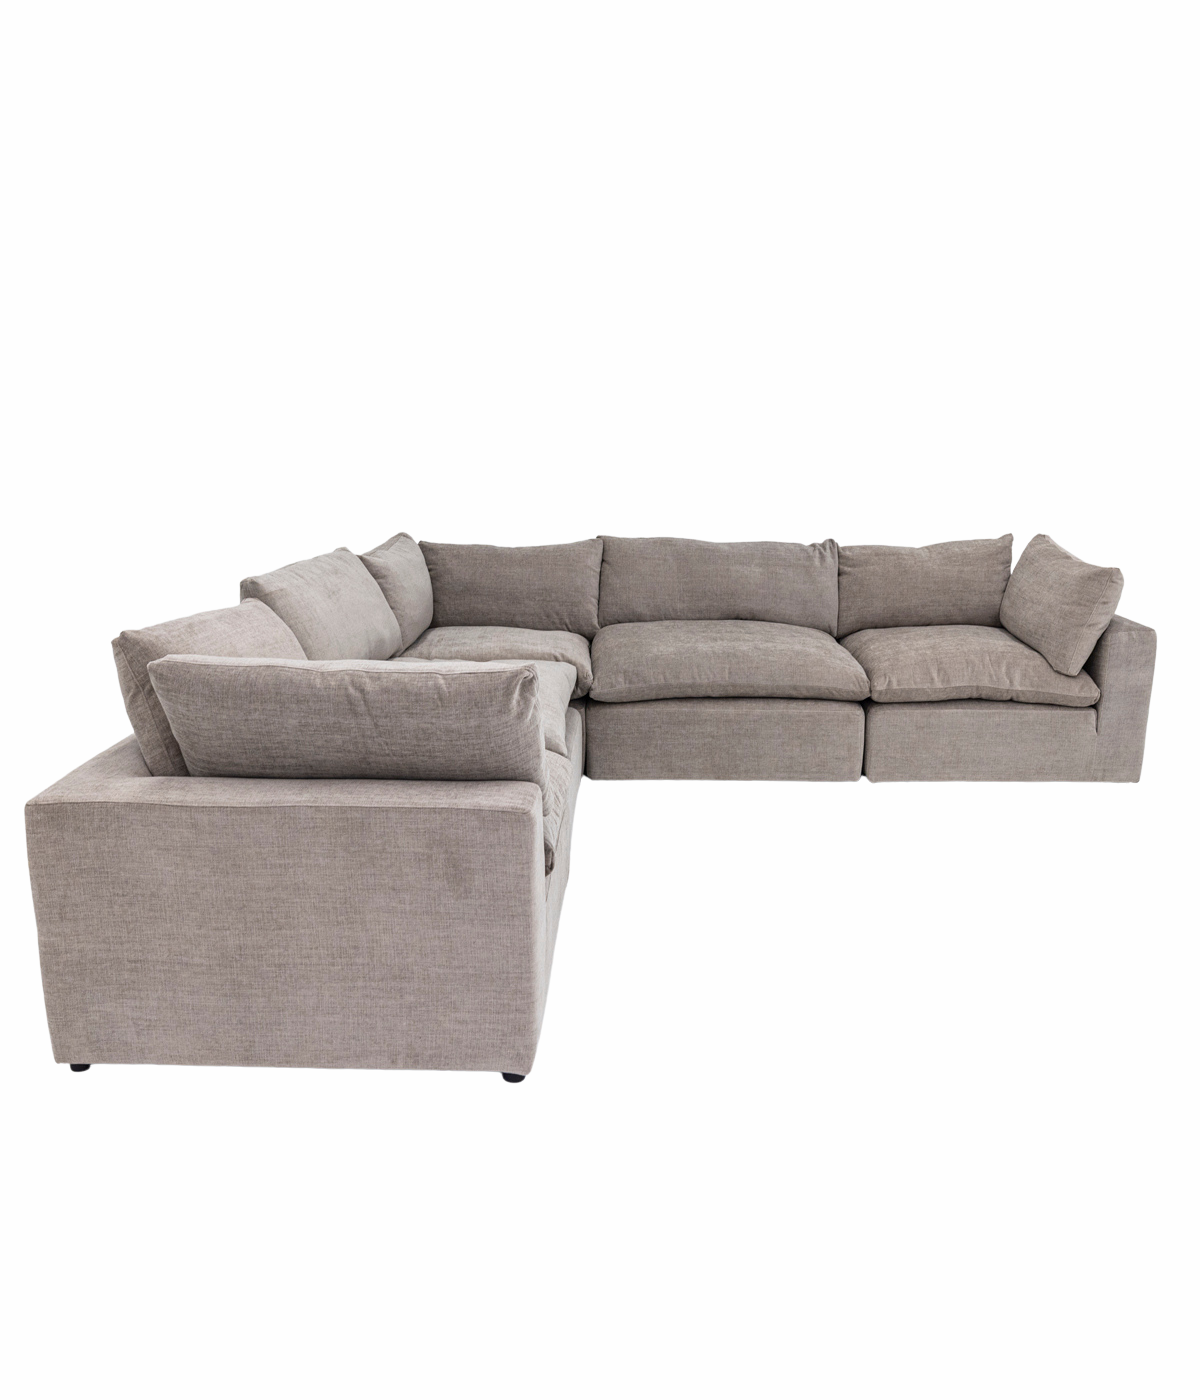 Full View Starlight Sectional